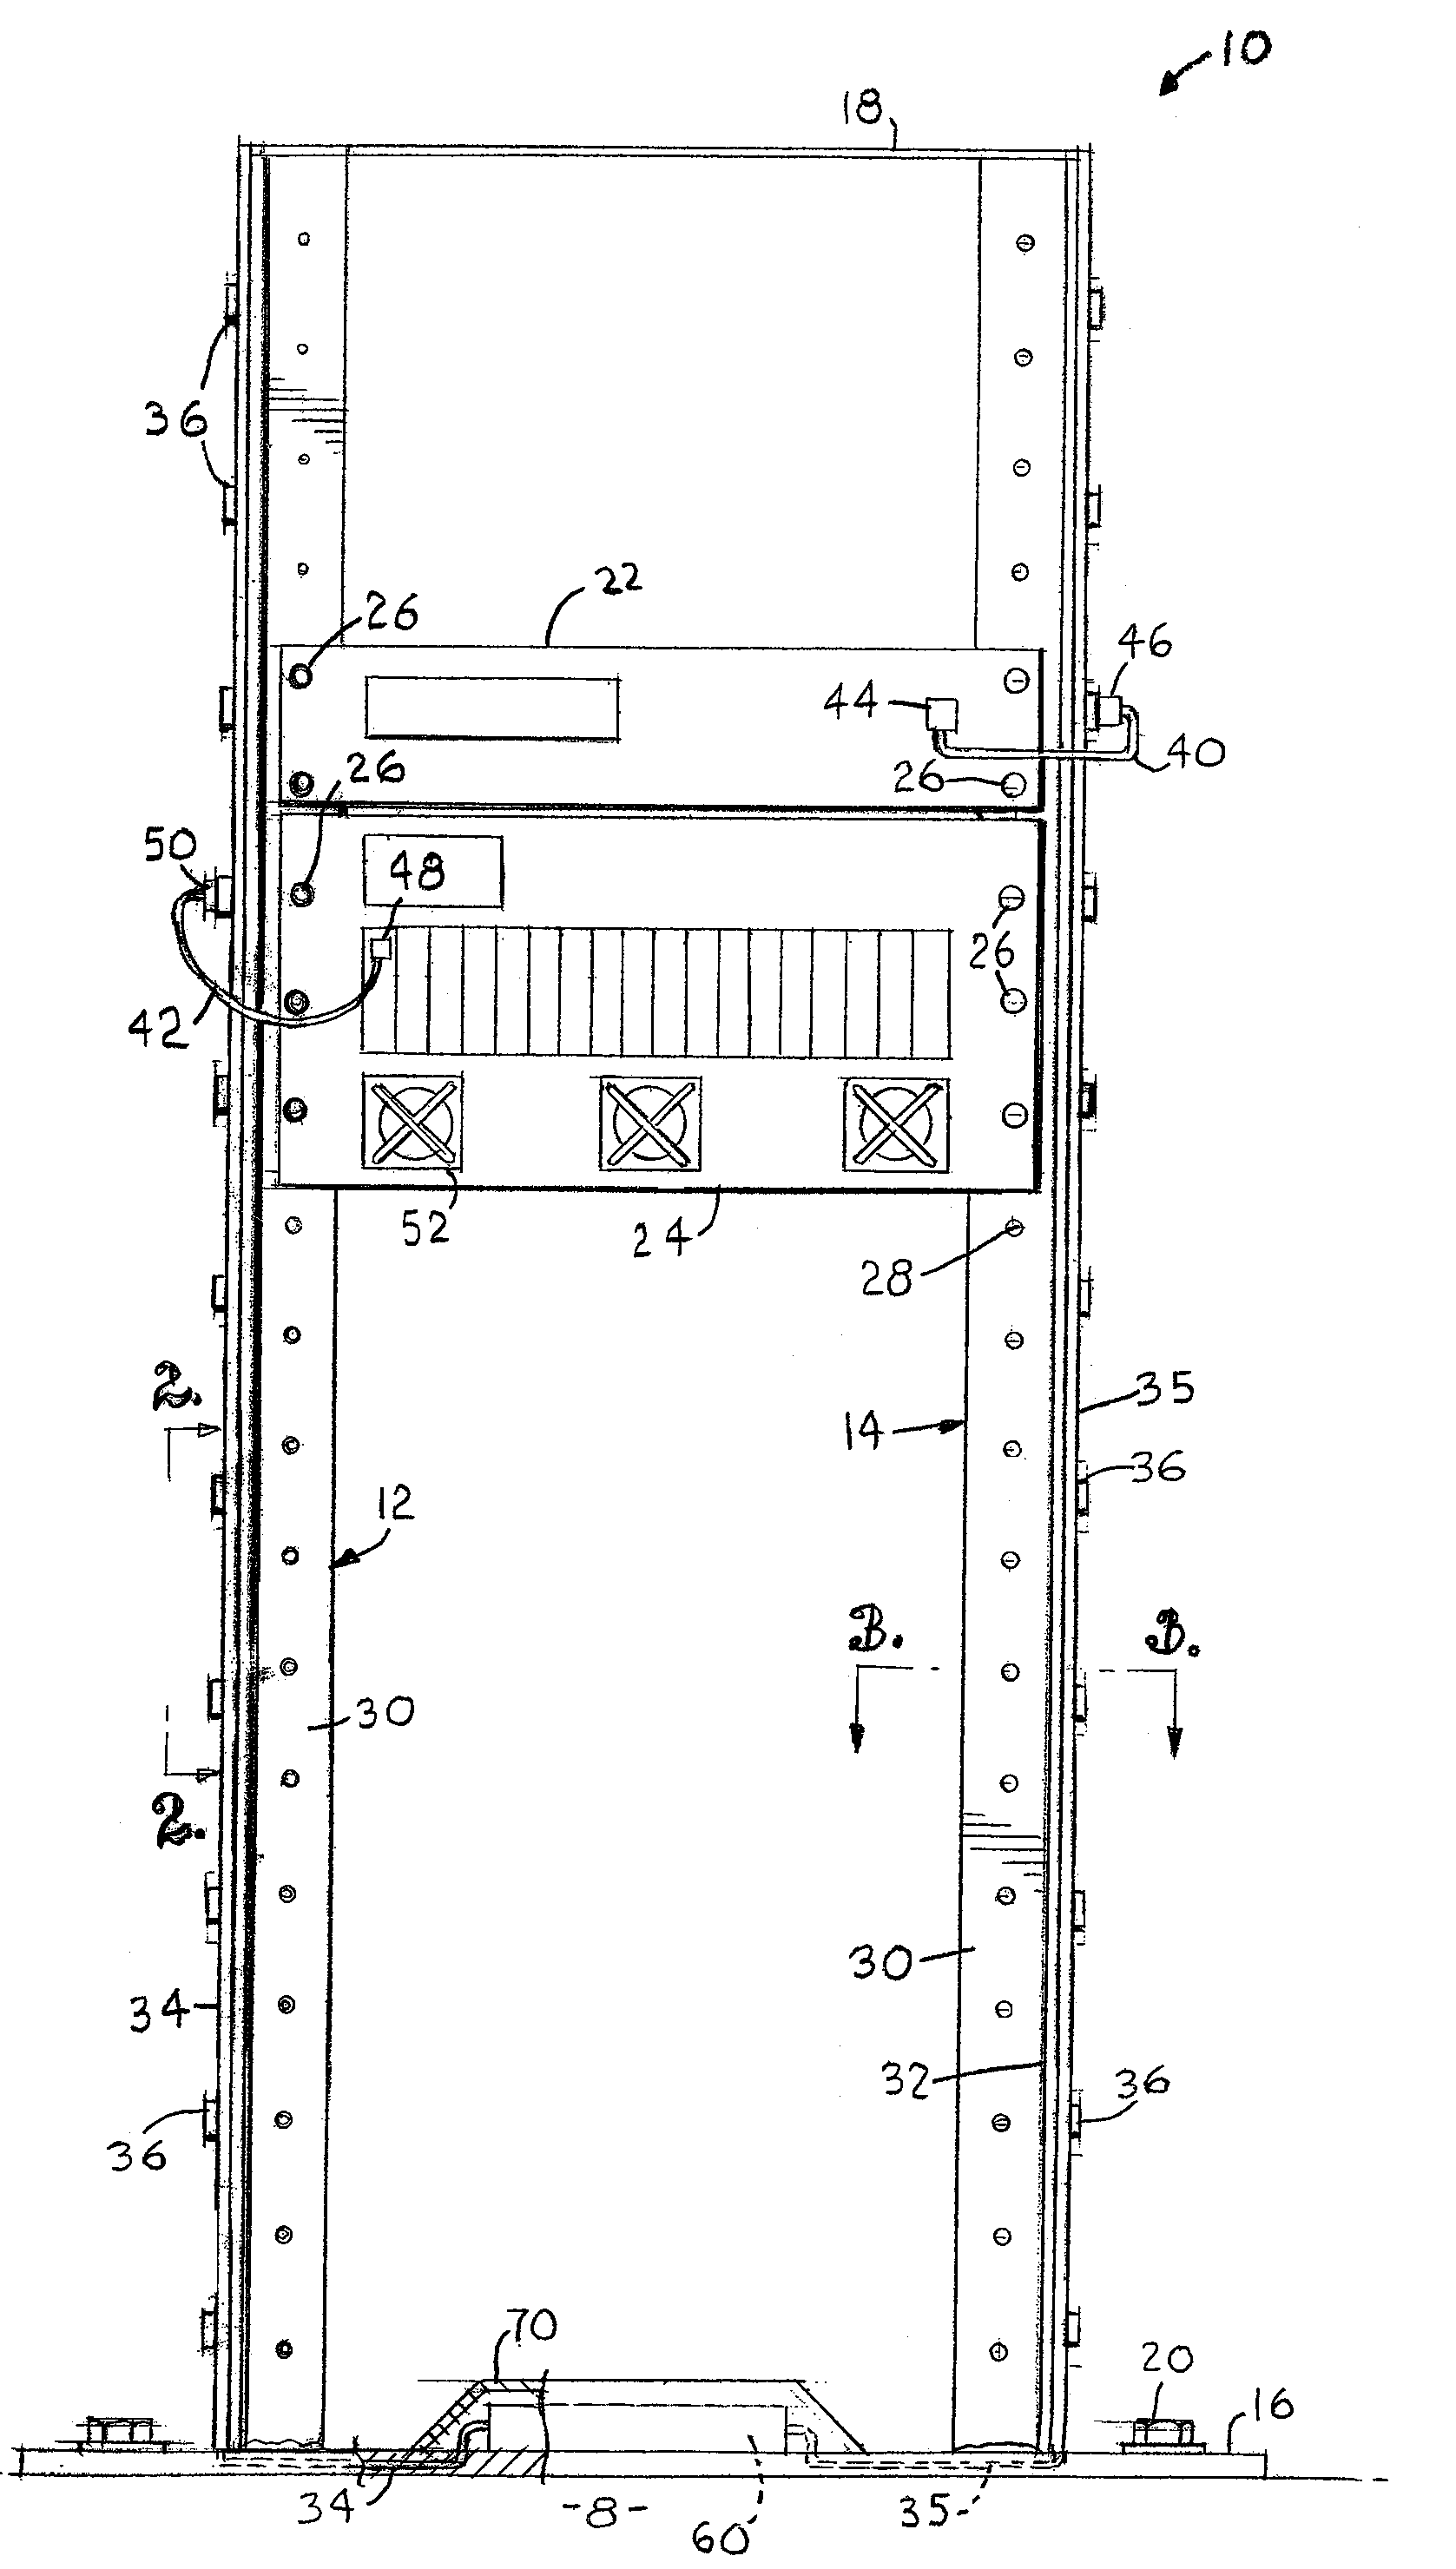 Equipment housing with interfacing computer